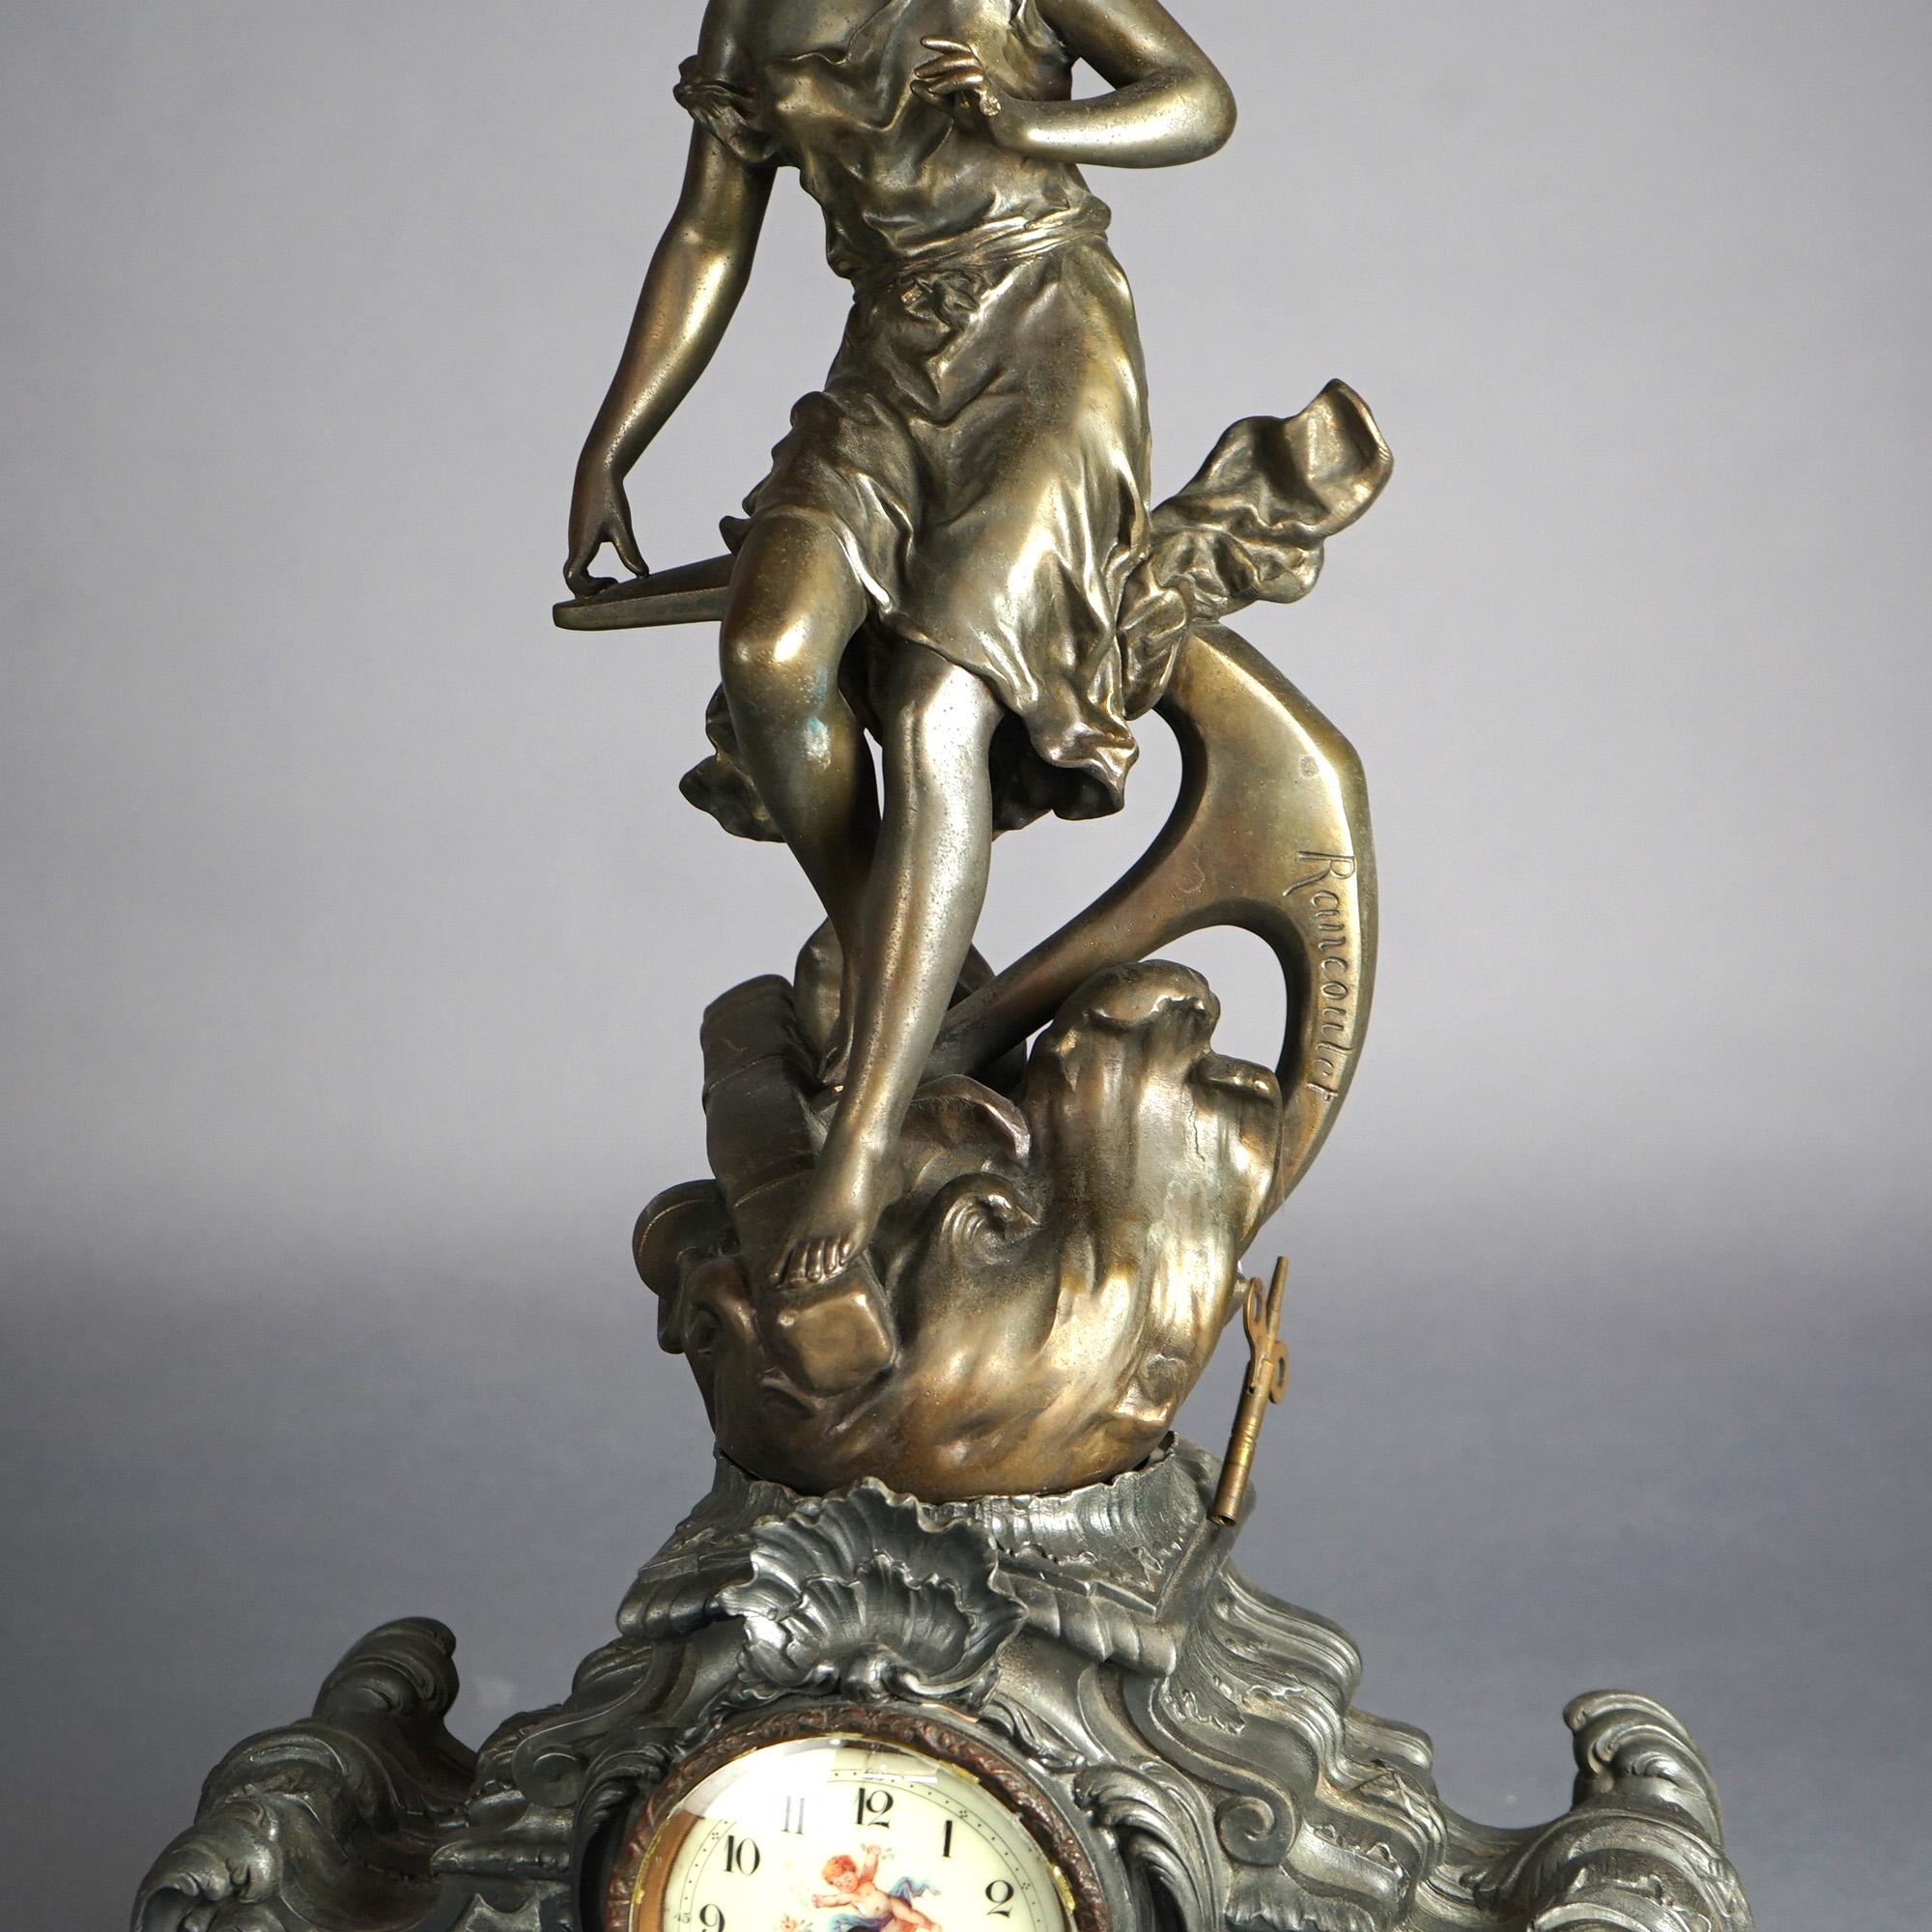 Antique Rococo Revival Bronzed Metal Figural Mantle Clock Signed Rancoulet C1890 5